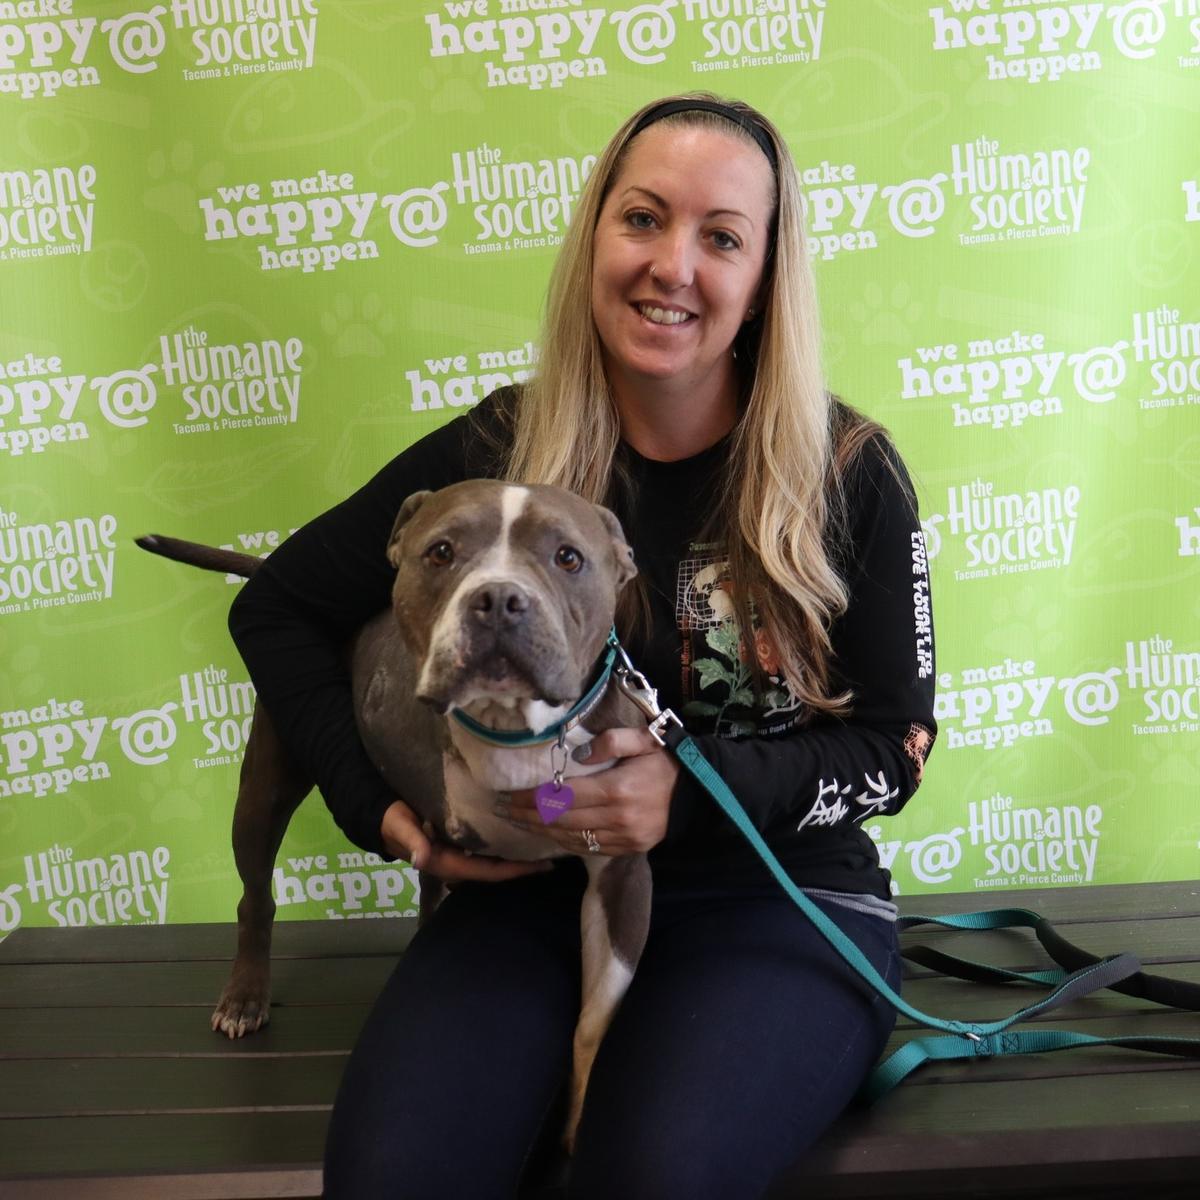 Wiggles and her new owner, a technician who cared for, and fell in love with, the pit bull with a "loving spirit." (Courtesy of The Humane Society for Tacoma & Pierce County)